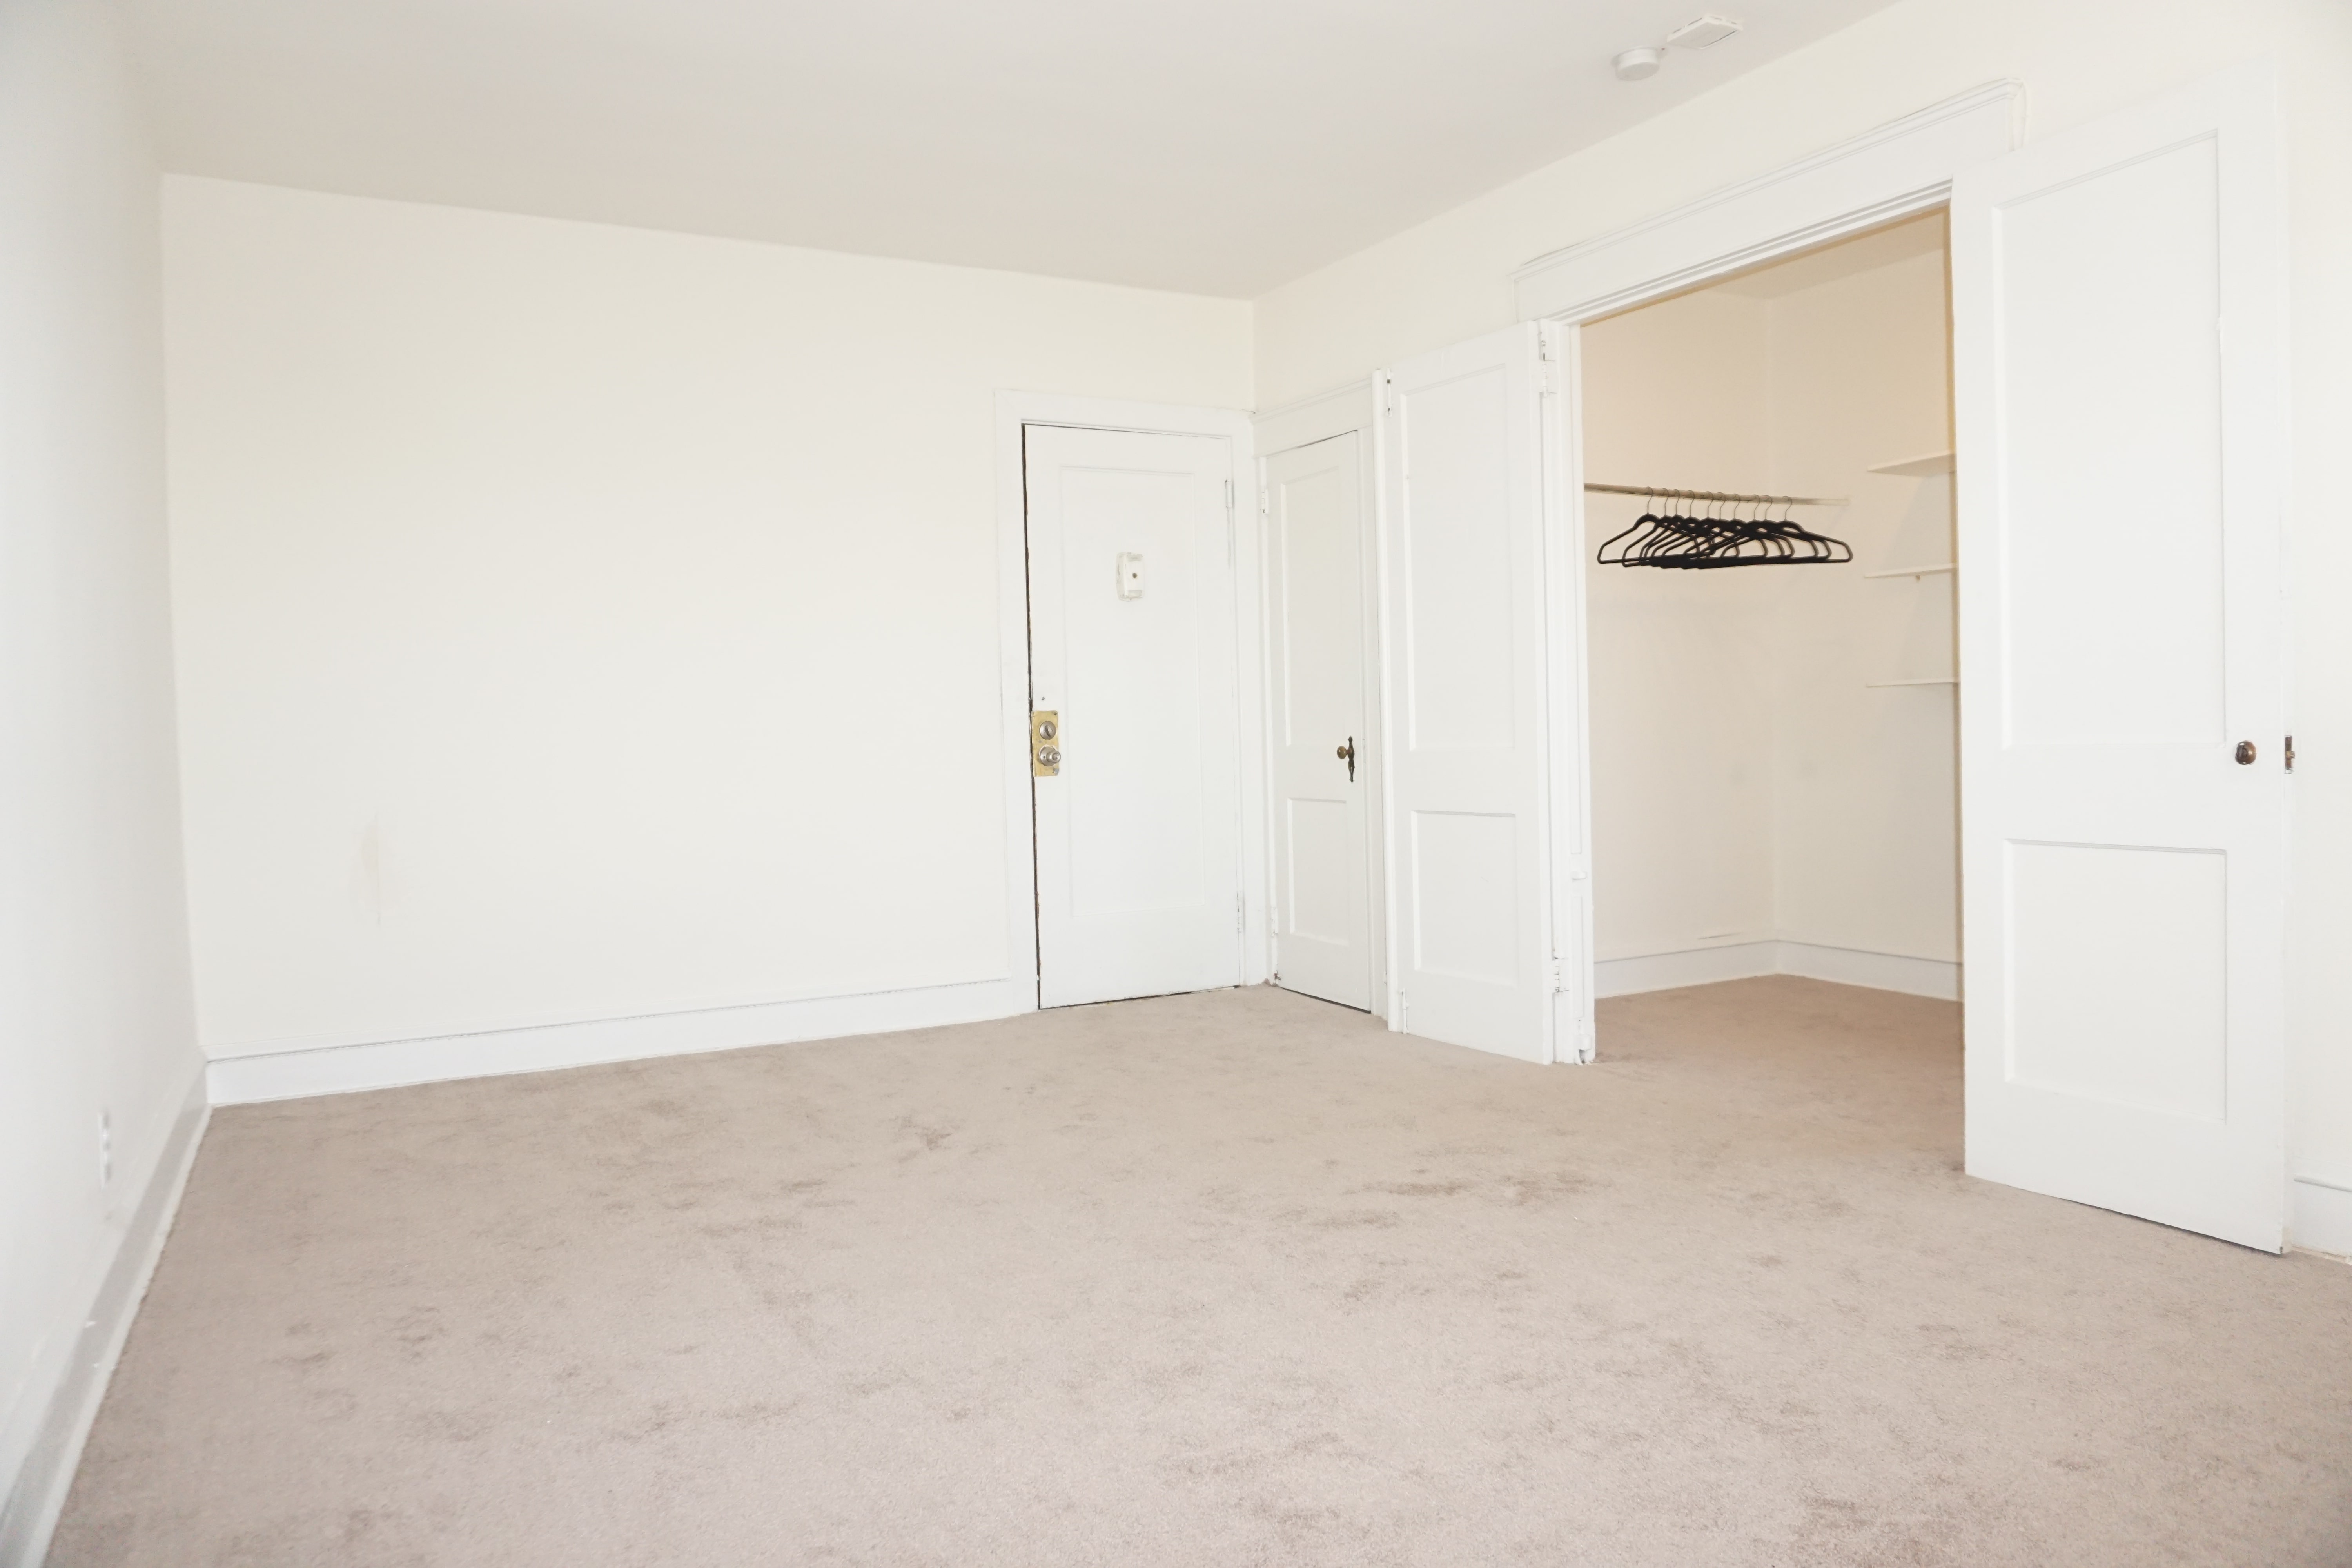 Spacious bedroom with walk-in closet in an apartment at Marshall House in Lansdowne, PA.